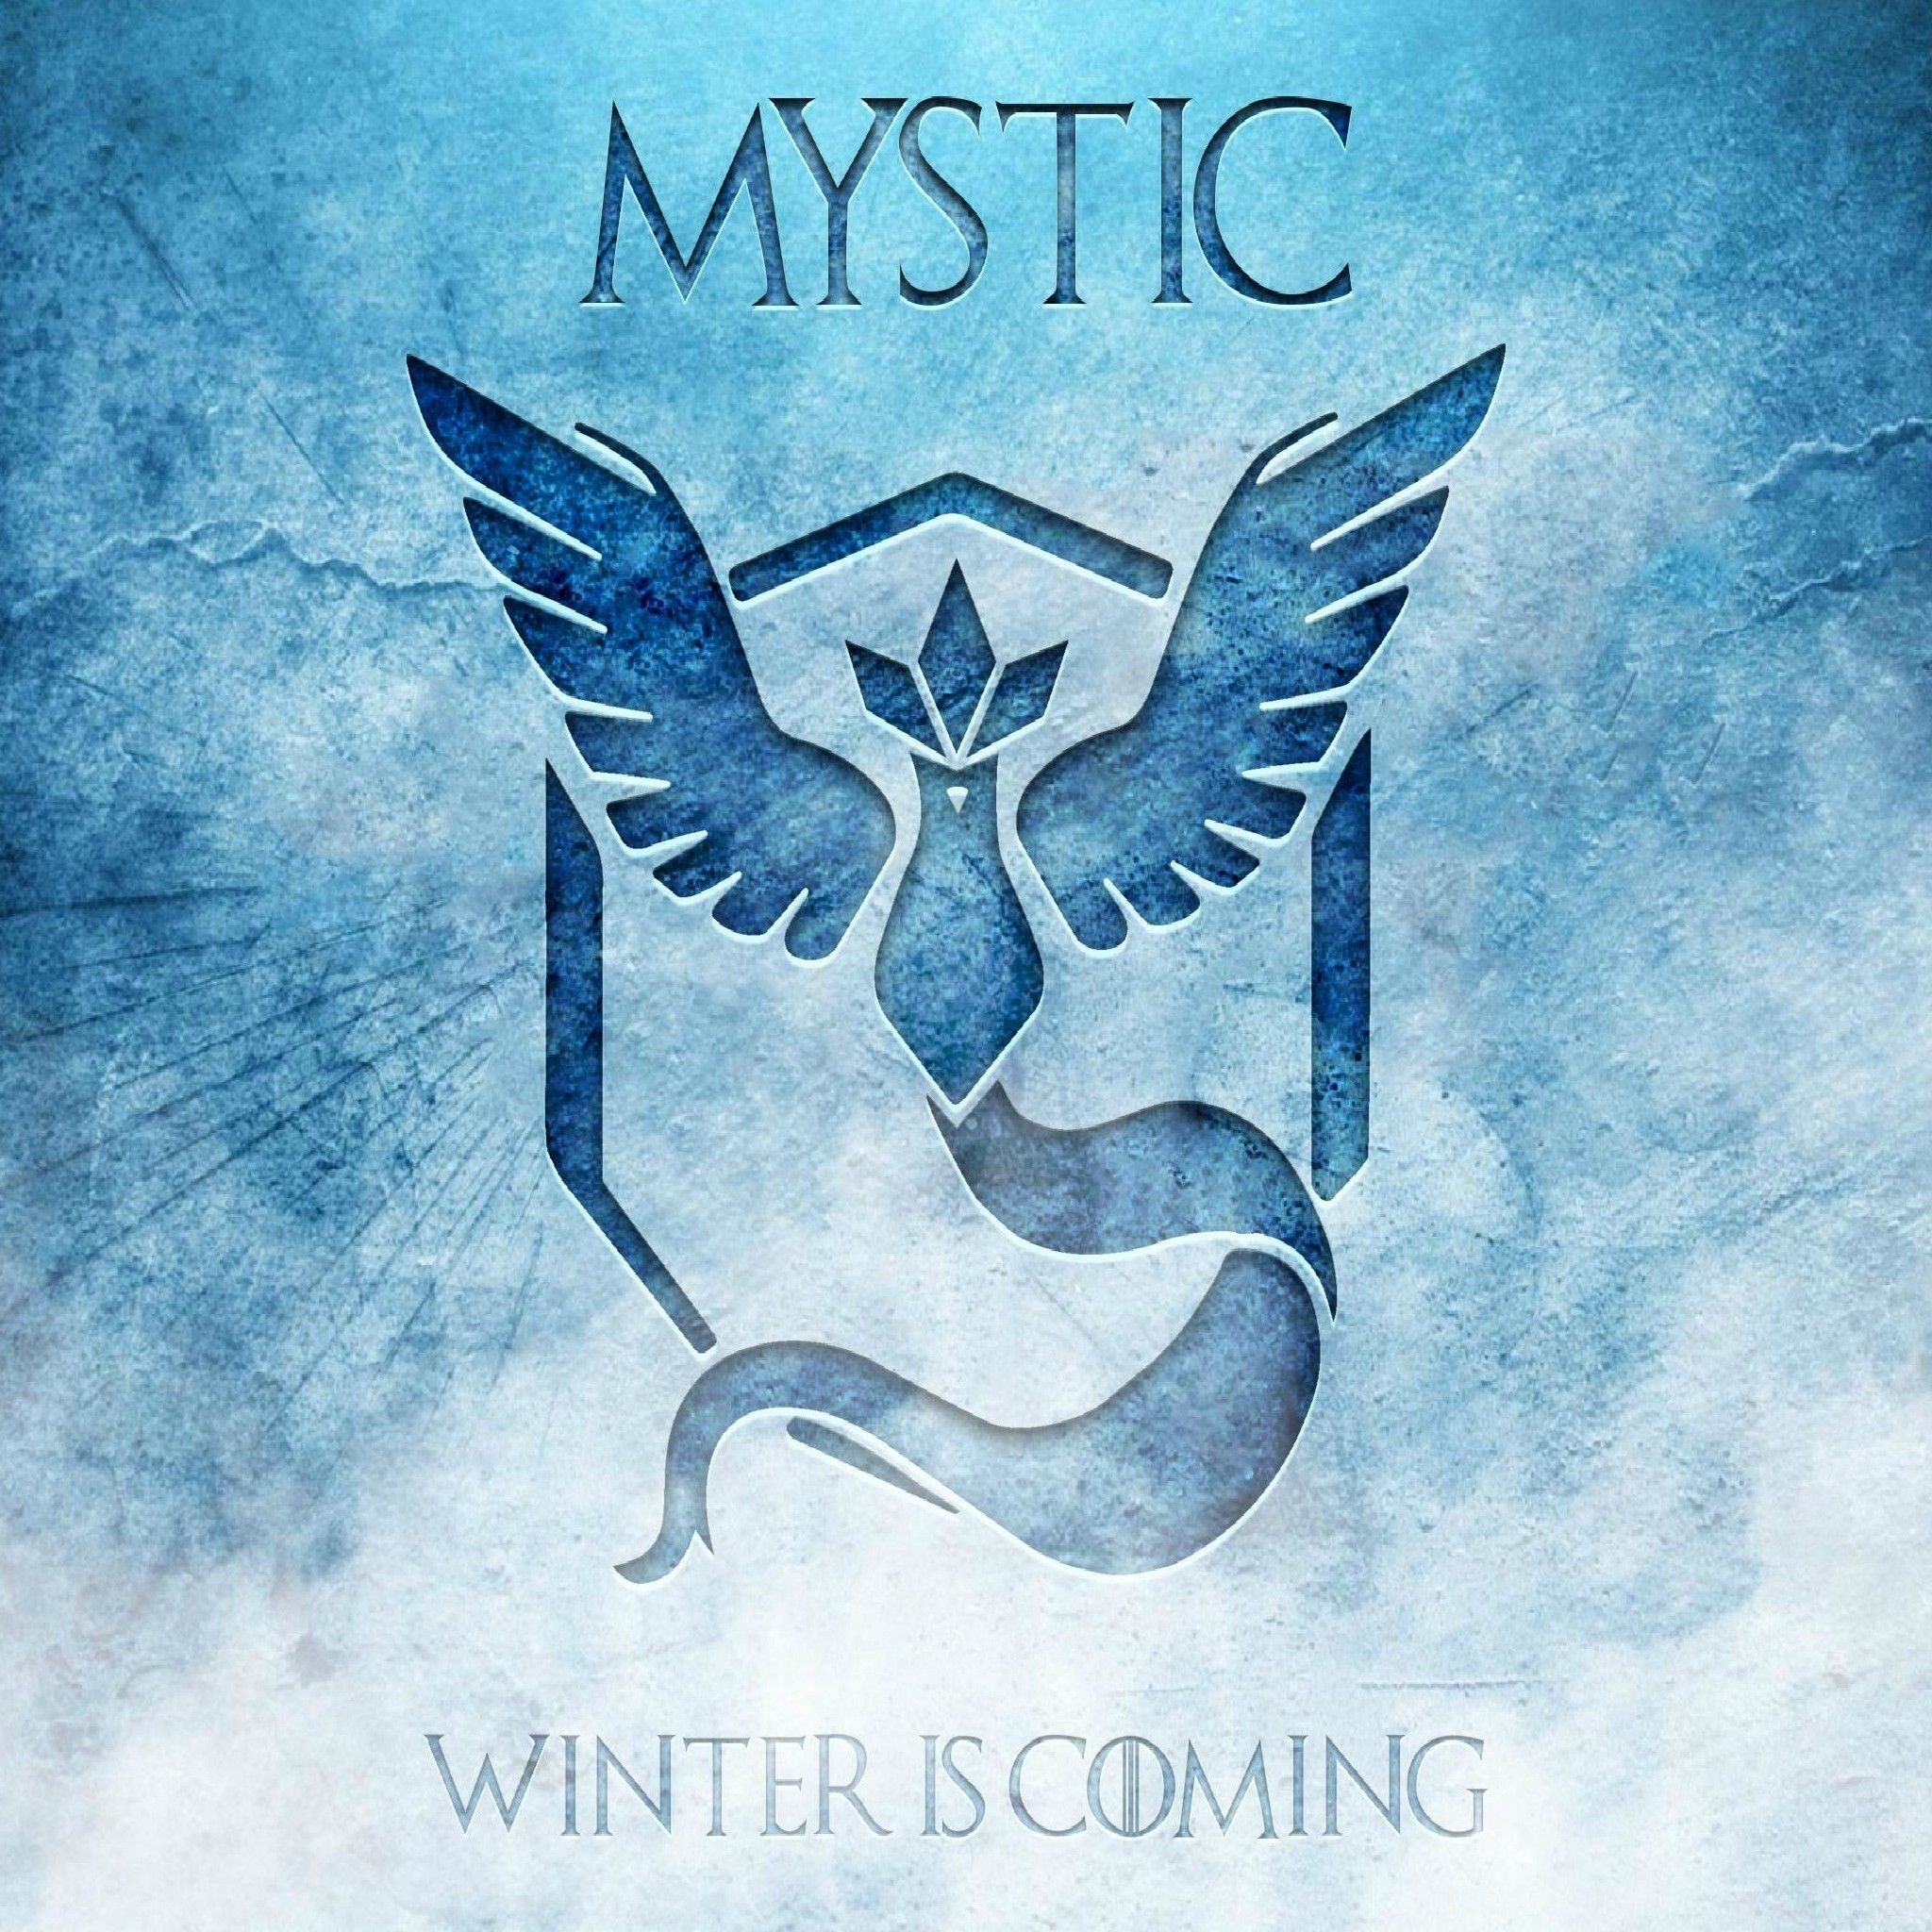 2048x2048 Mystic Winter is Coming - Tap to see more cool Pokemon wallpaper! @mobile9